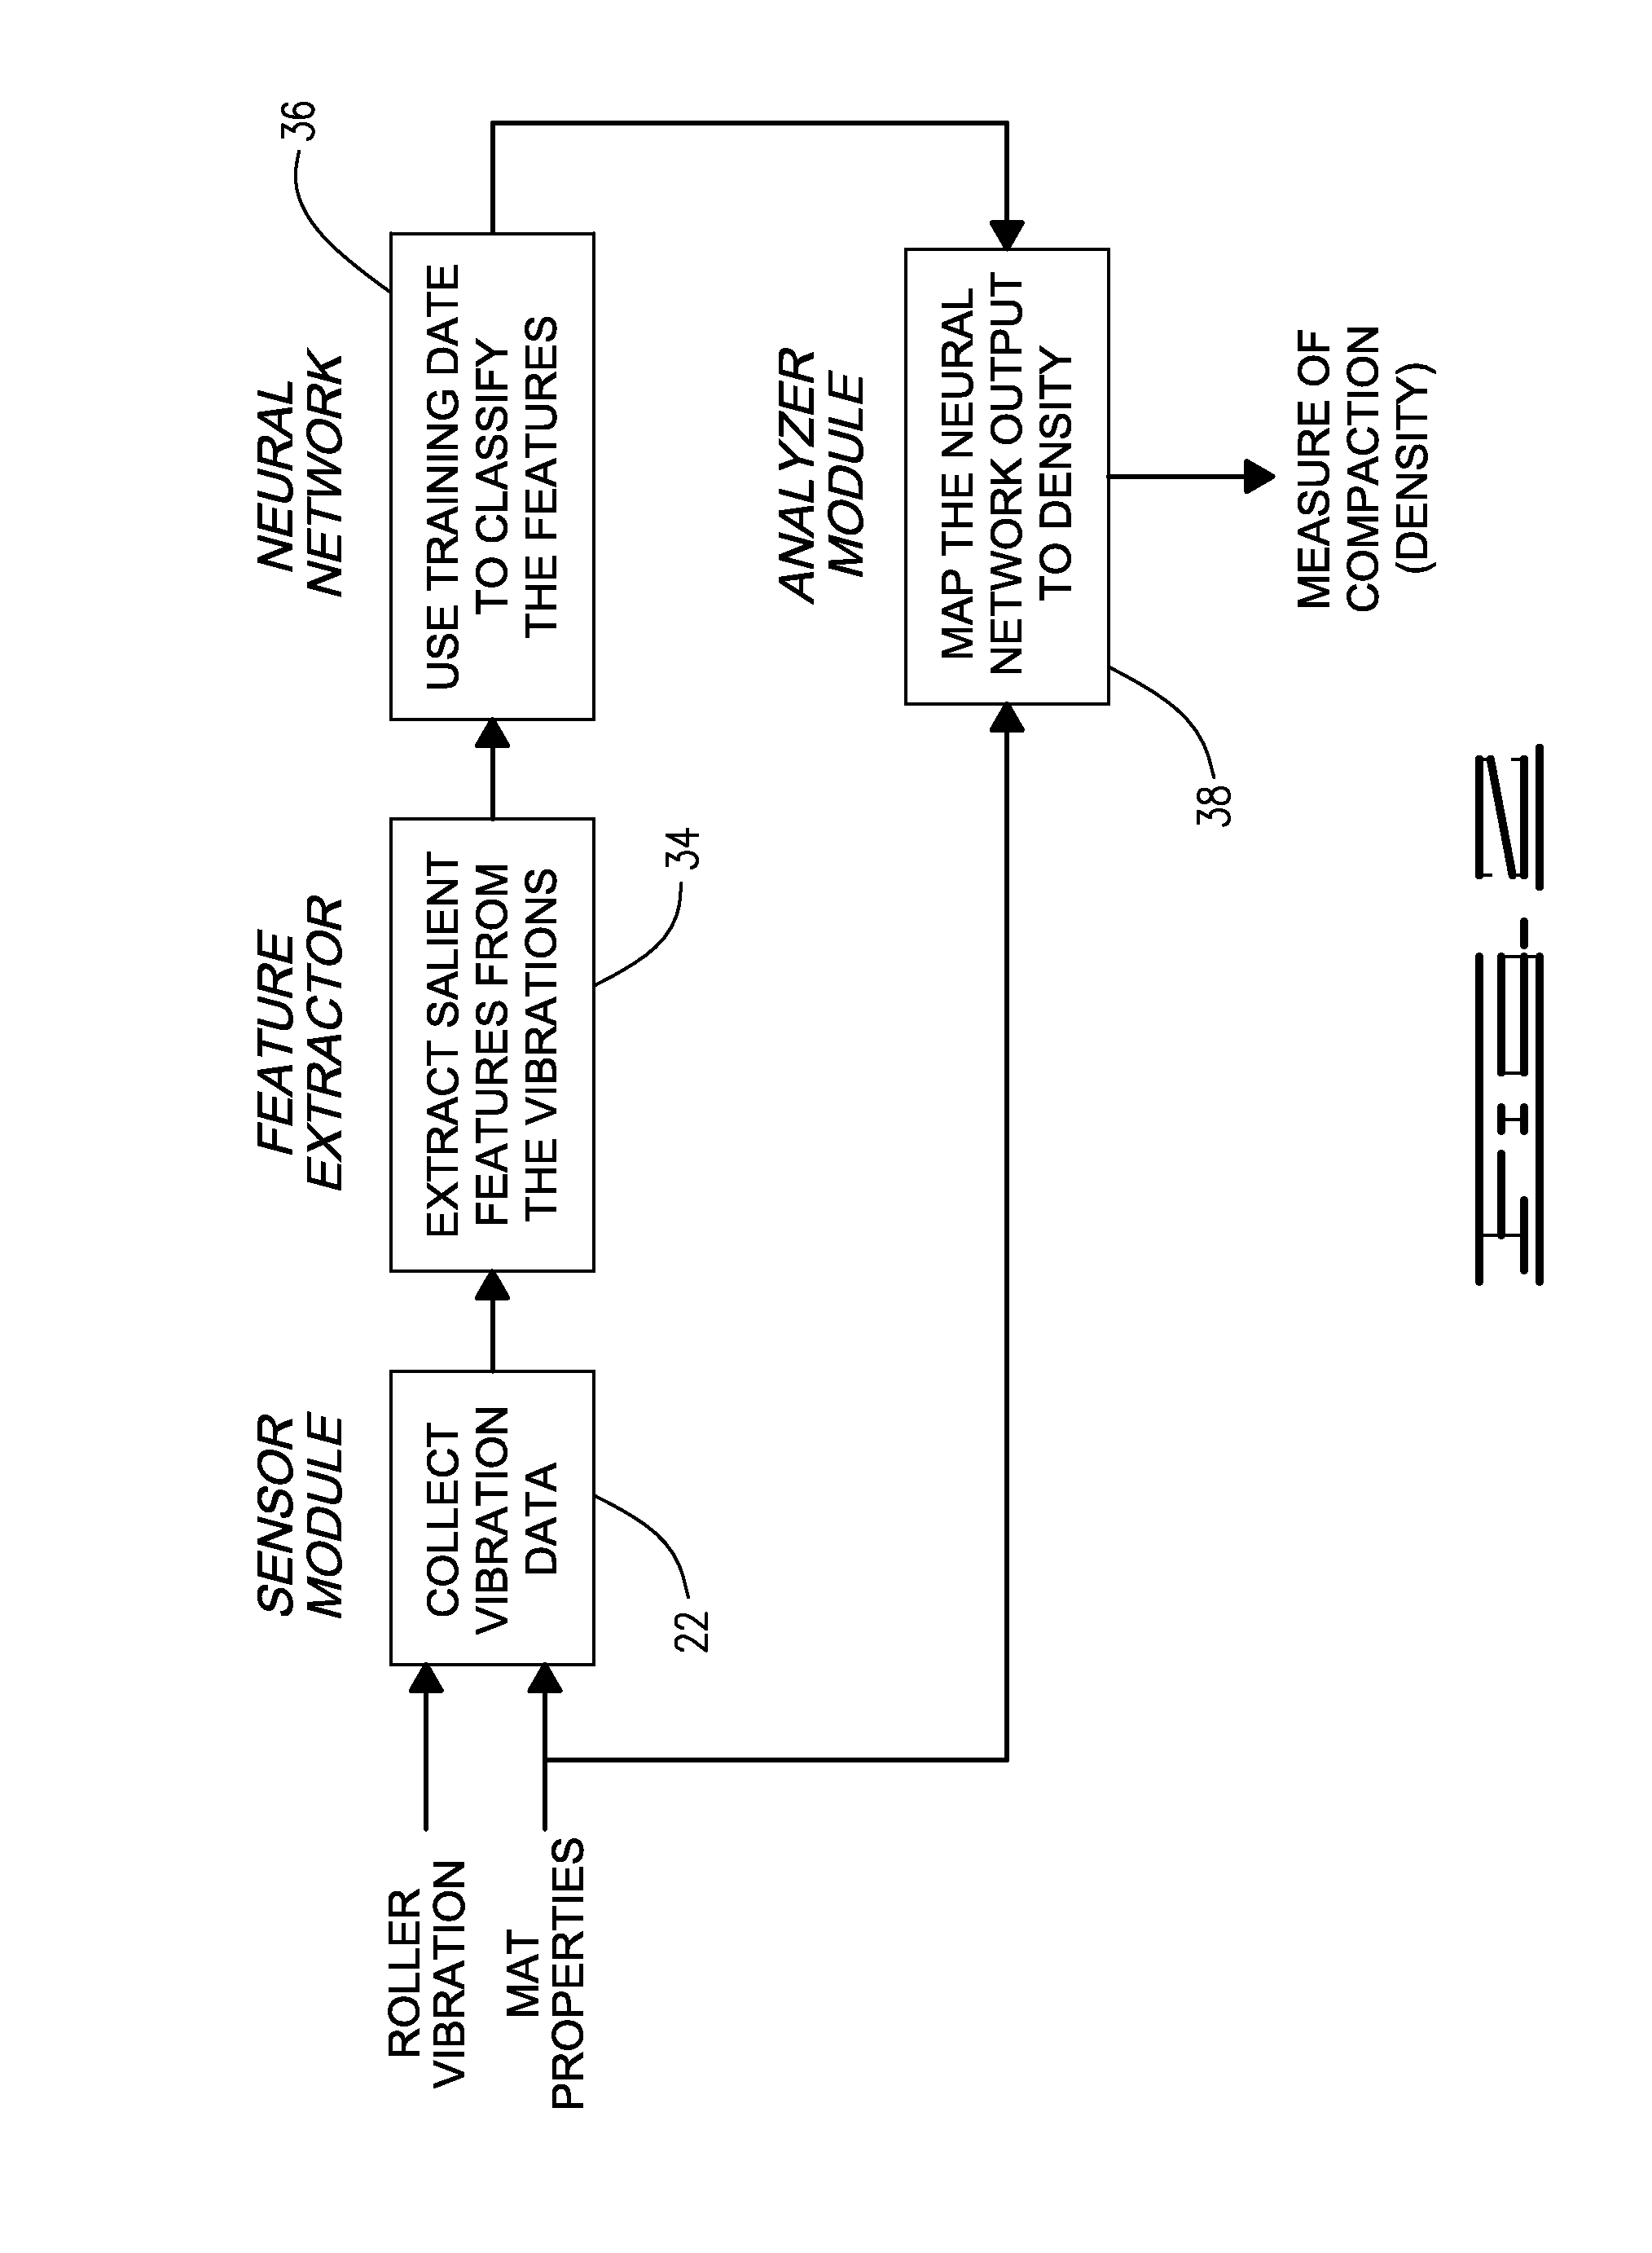 Method and apparatus for determining stiffness of a roadway